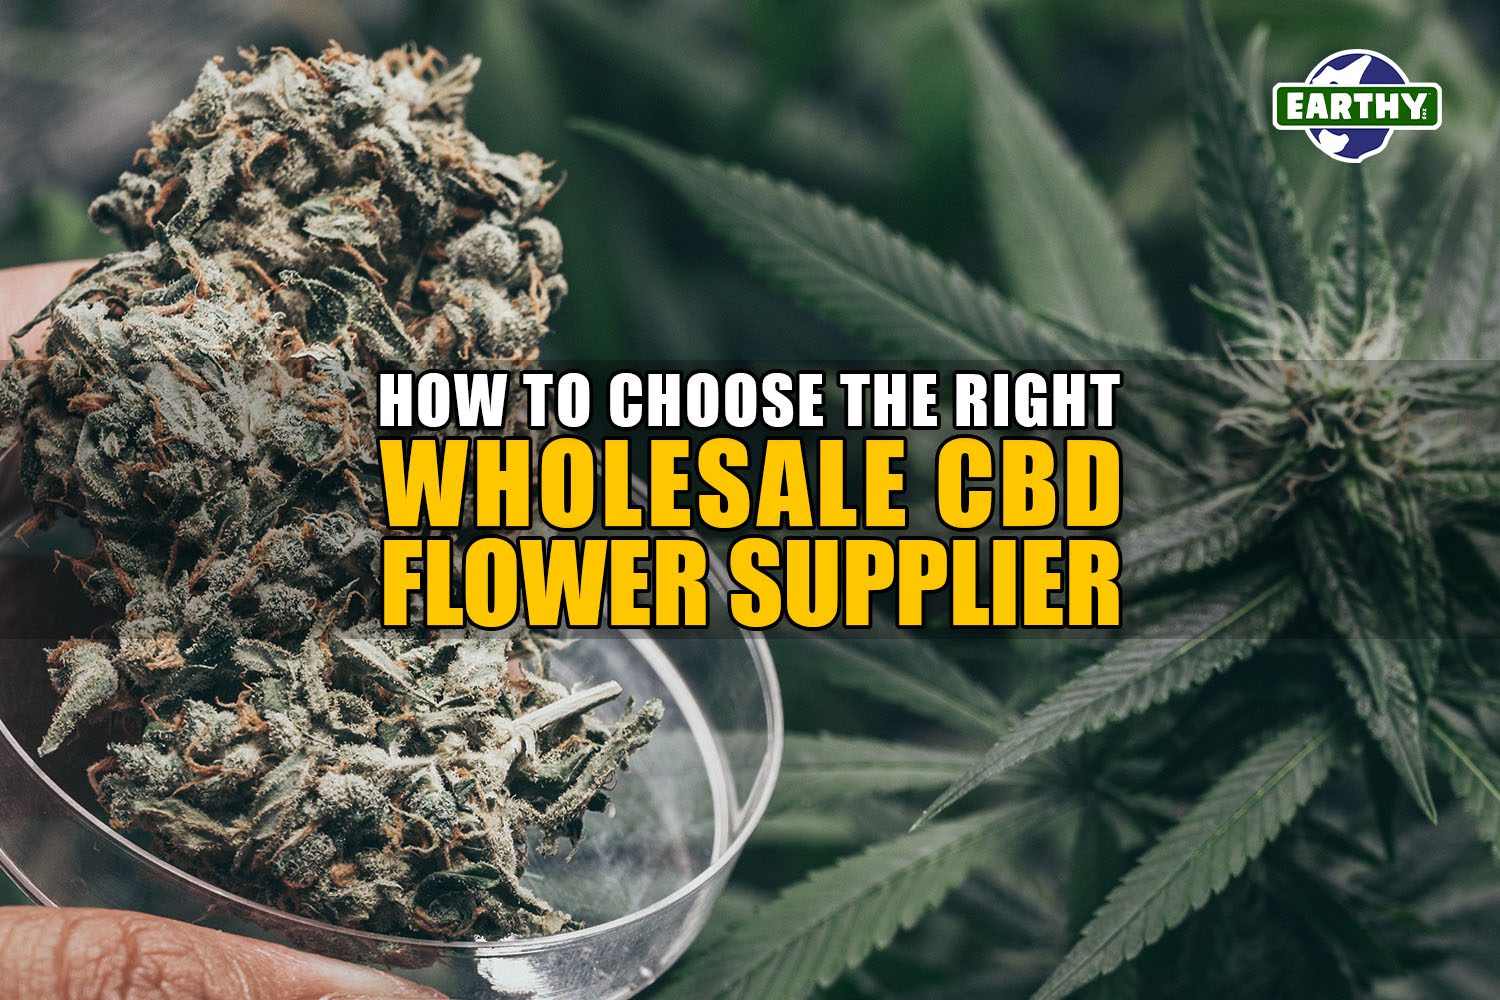 How to Choose the Right Wholesale CBD Flower Supplier | Earthy Wholesale